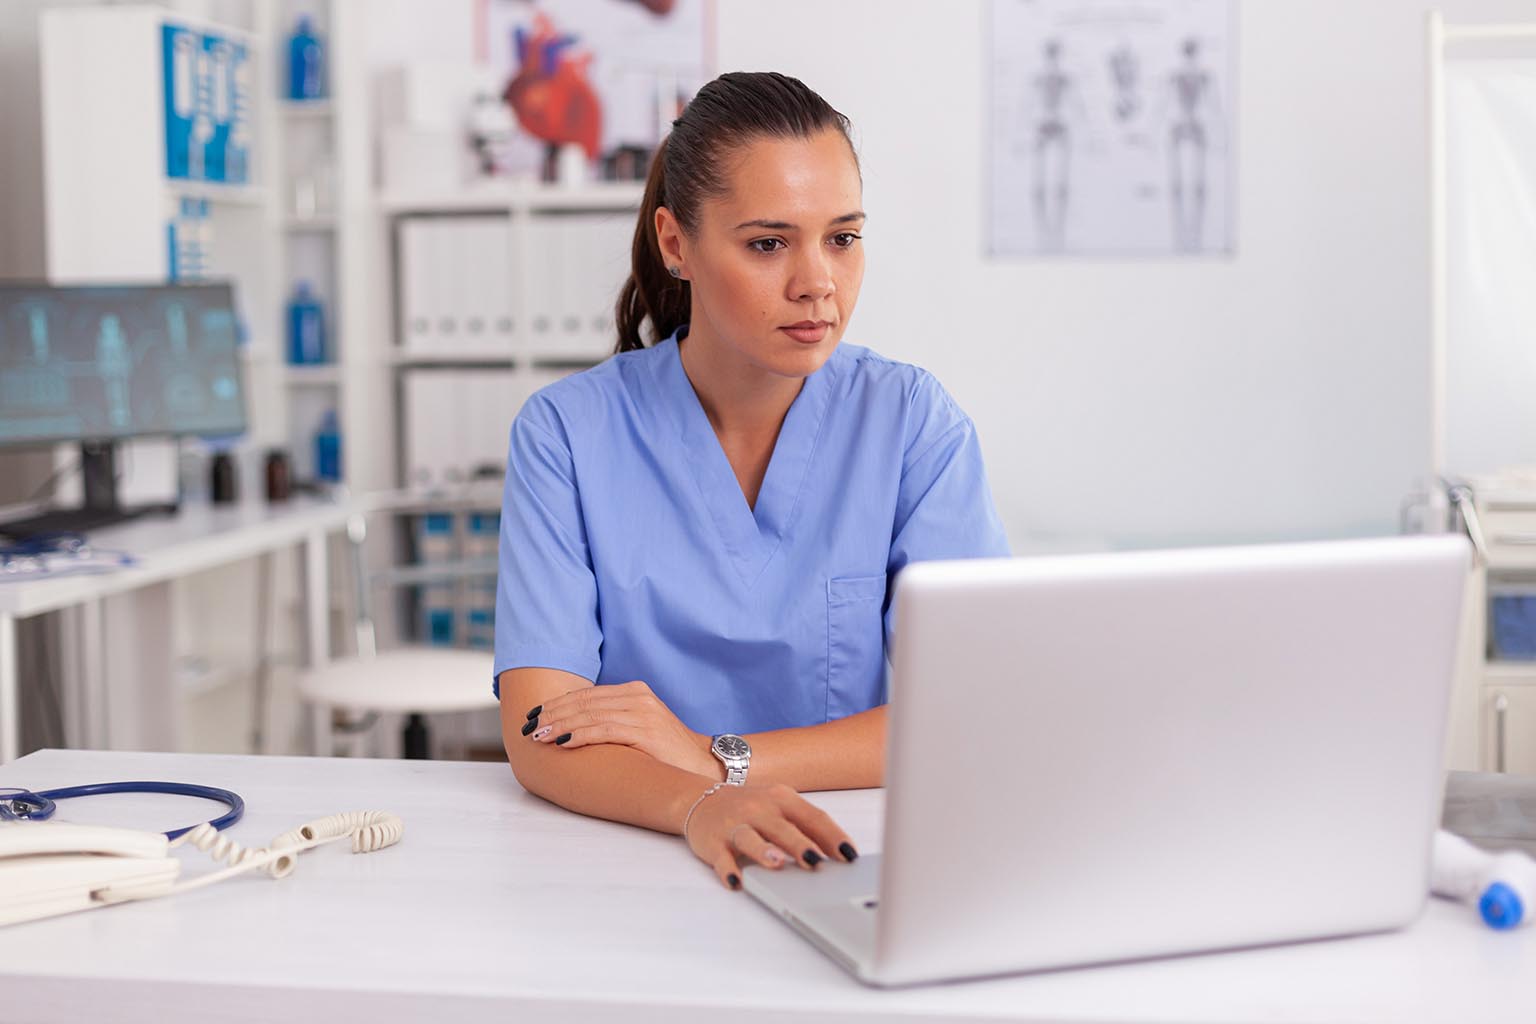 Five ways marketers can engage nurses using professional podcasts and videos